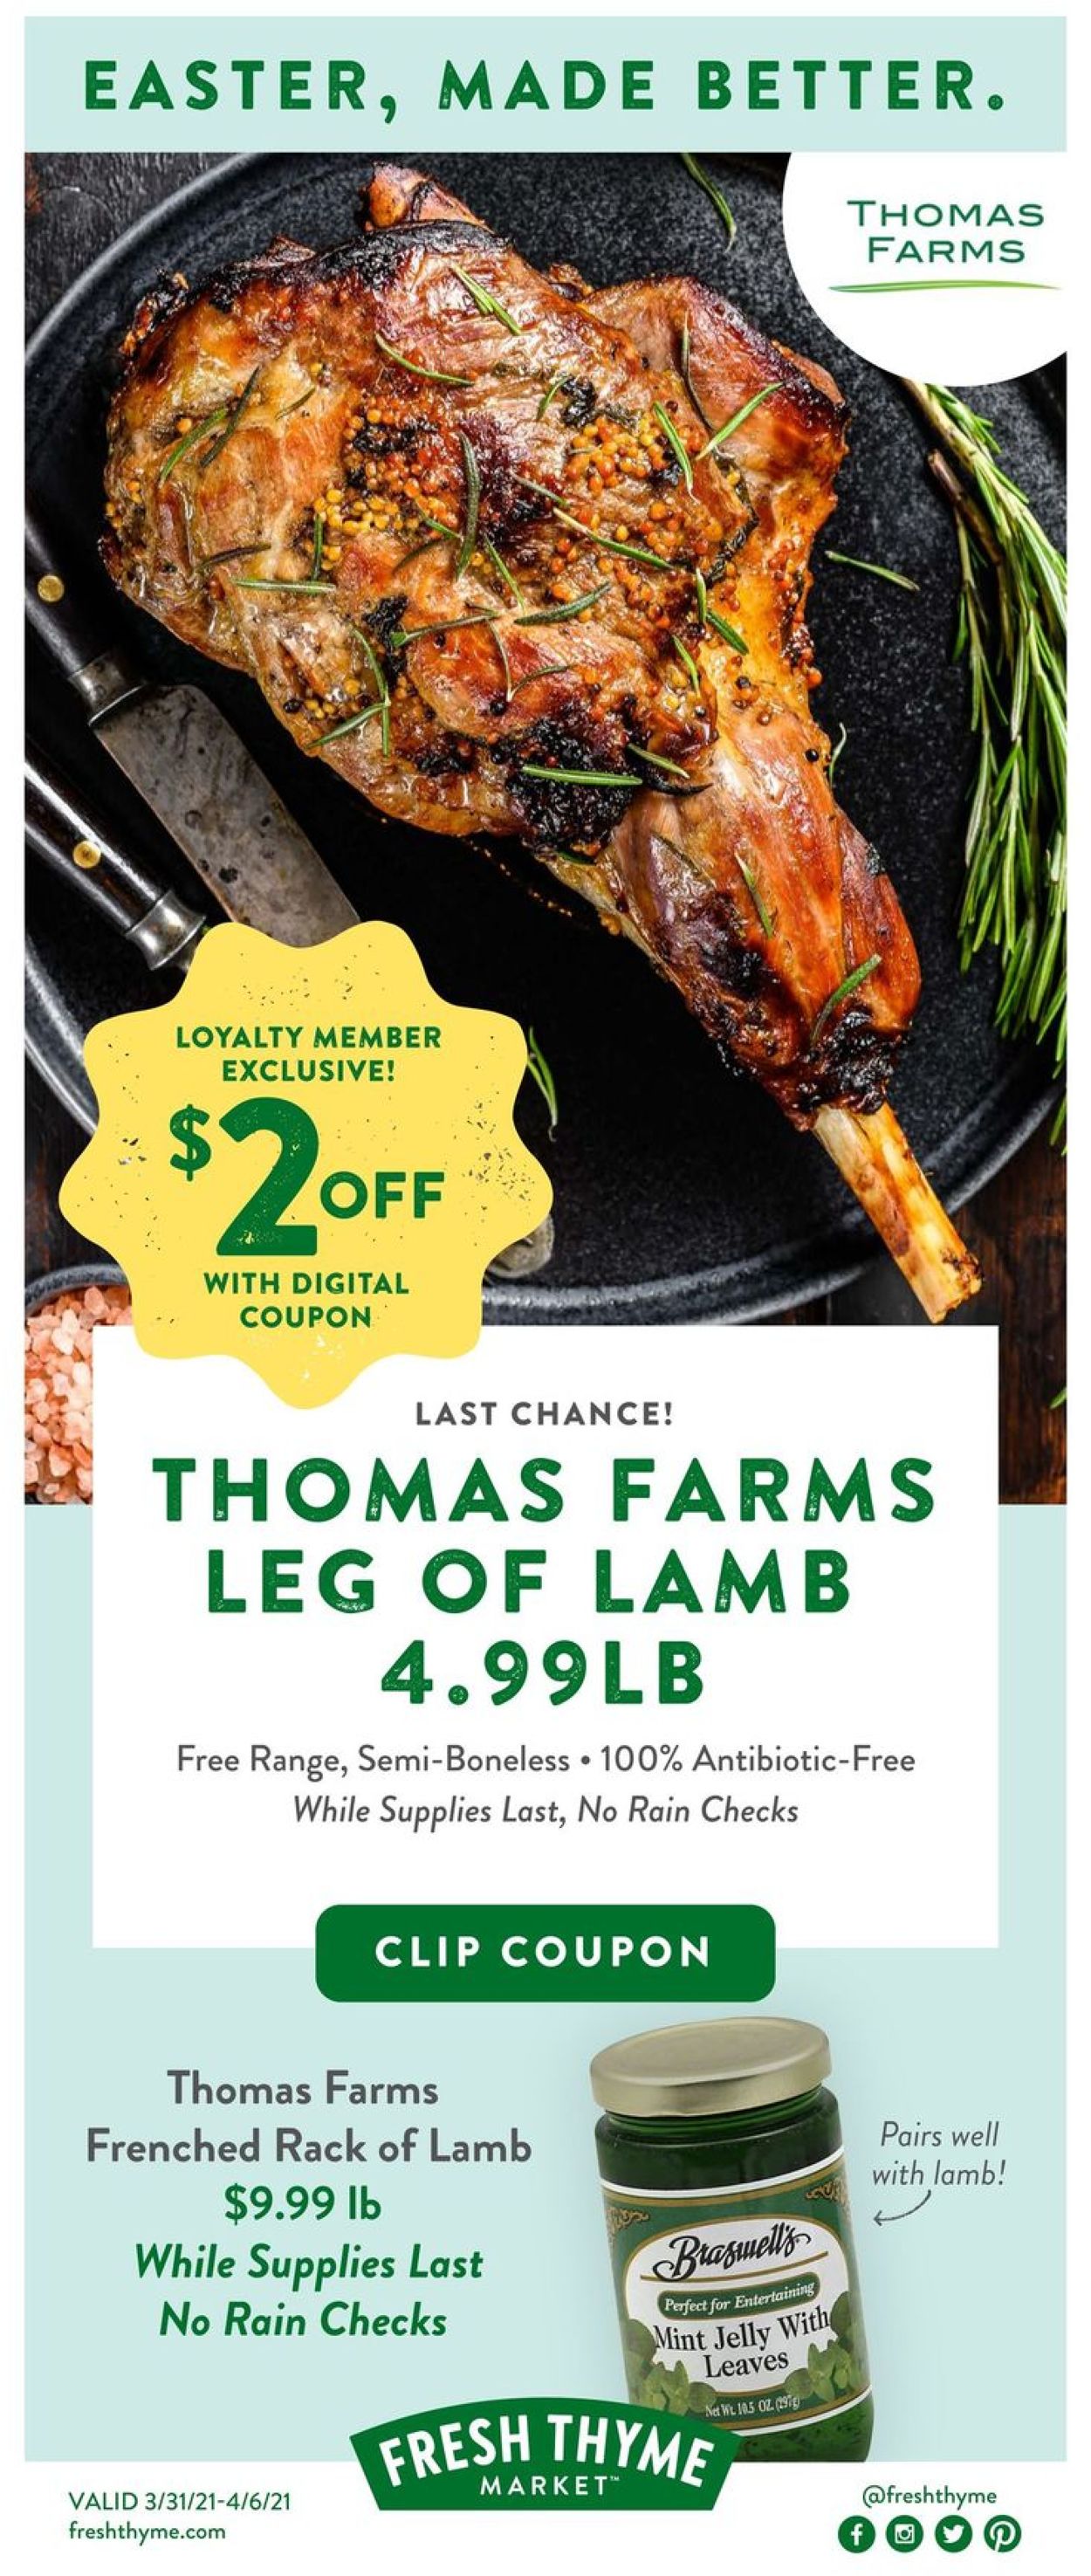 fresh thyme hours monday